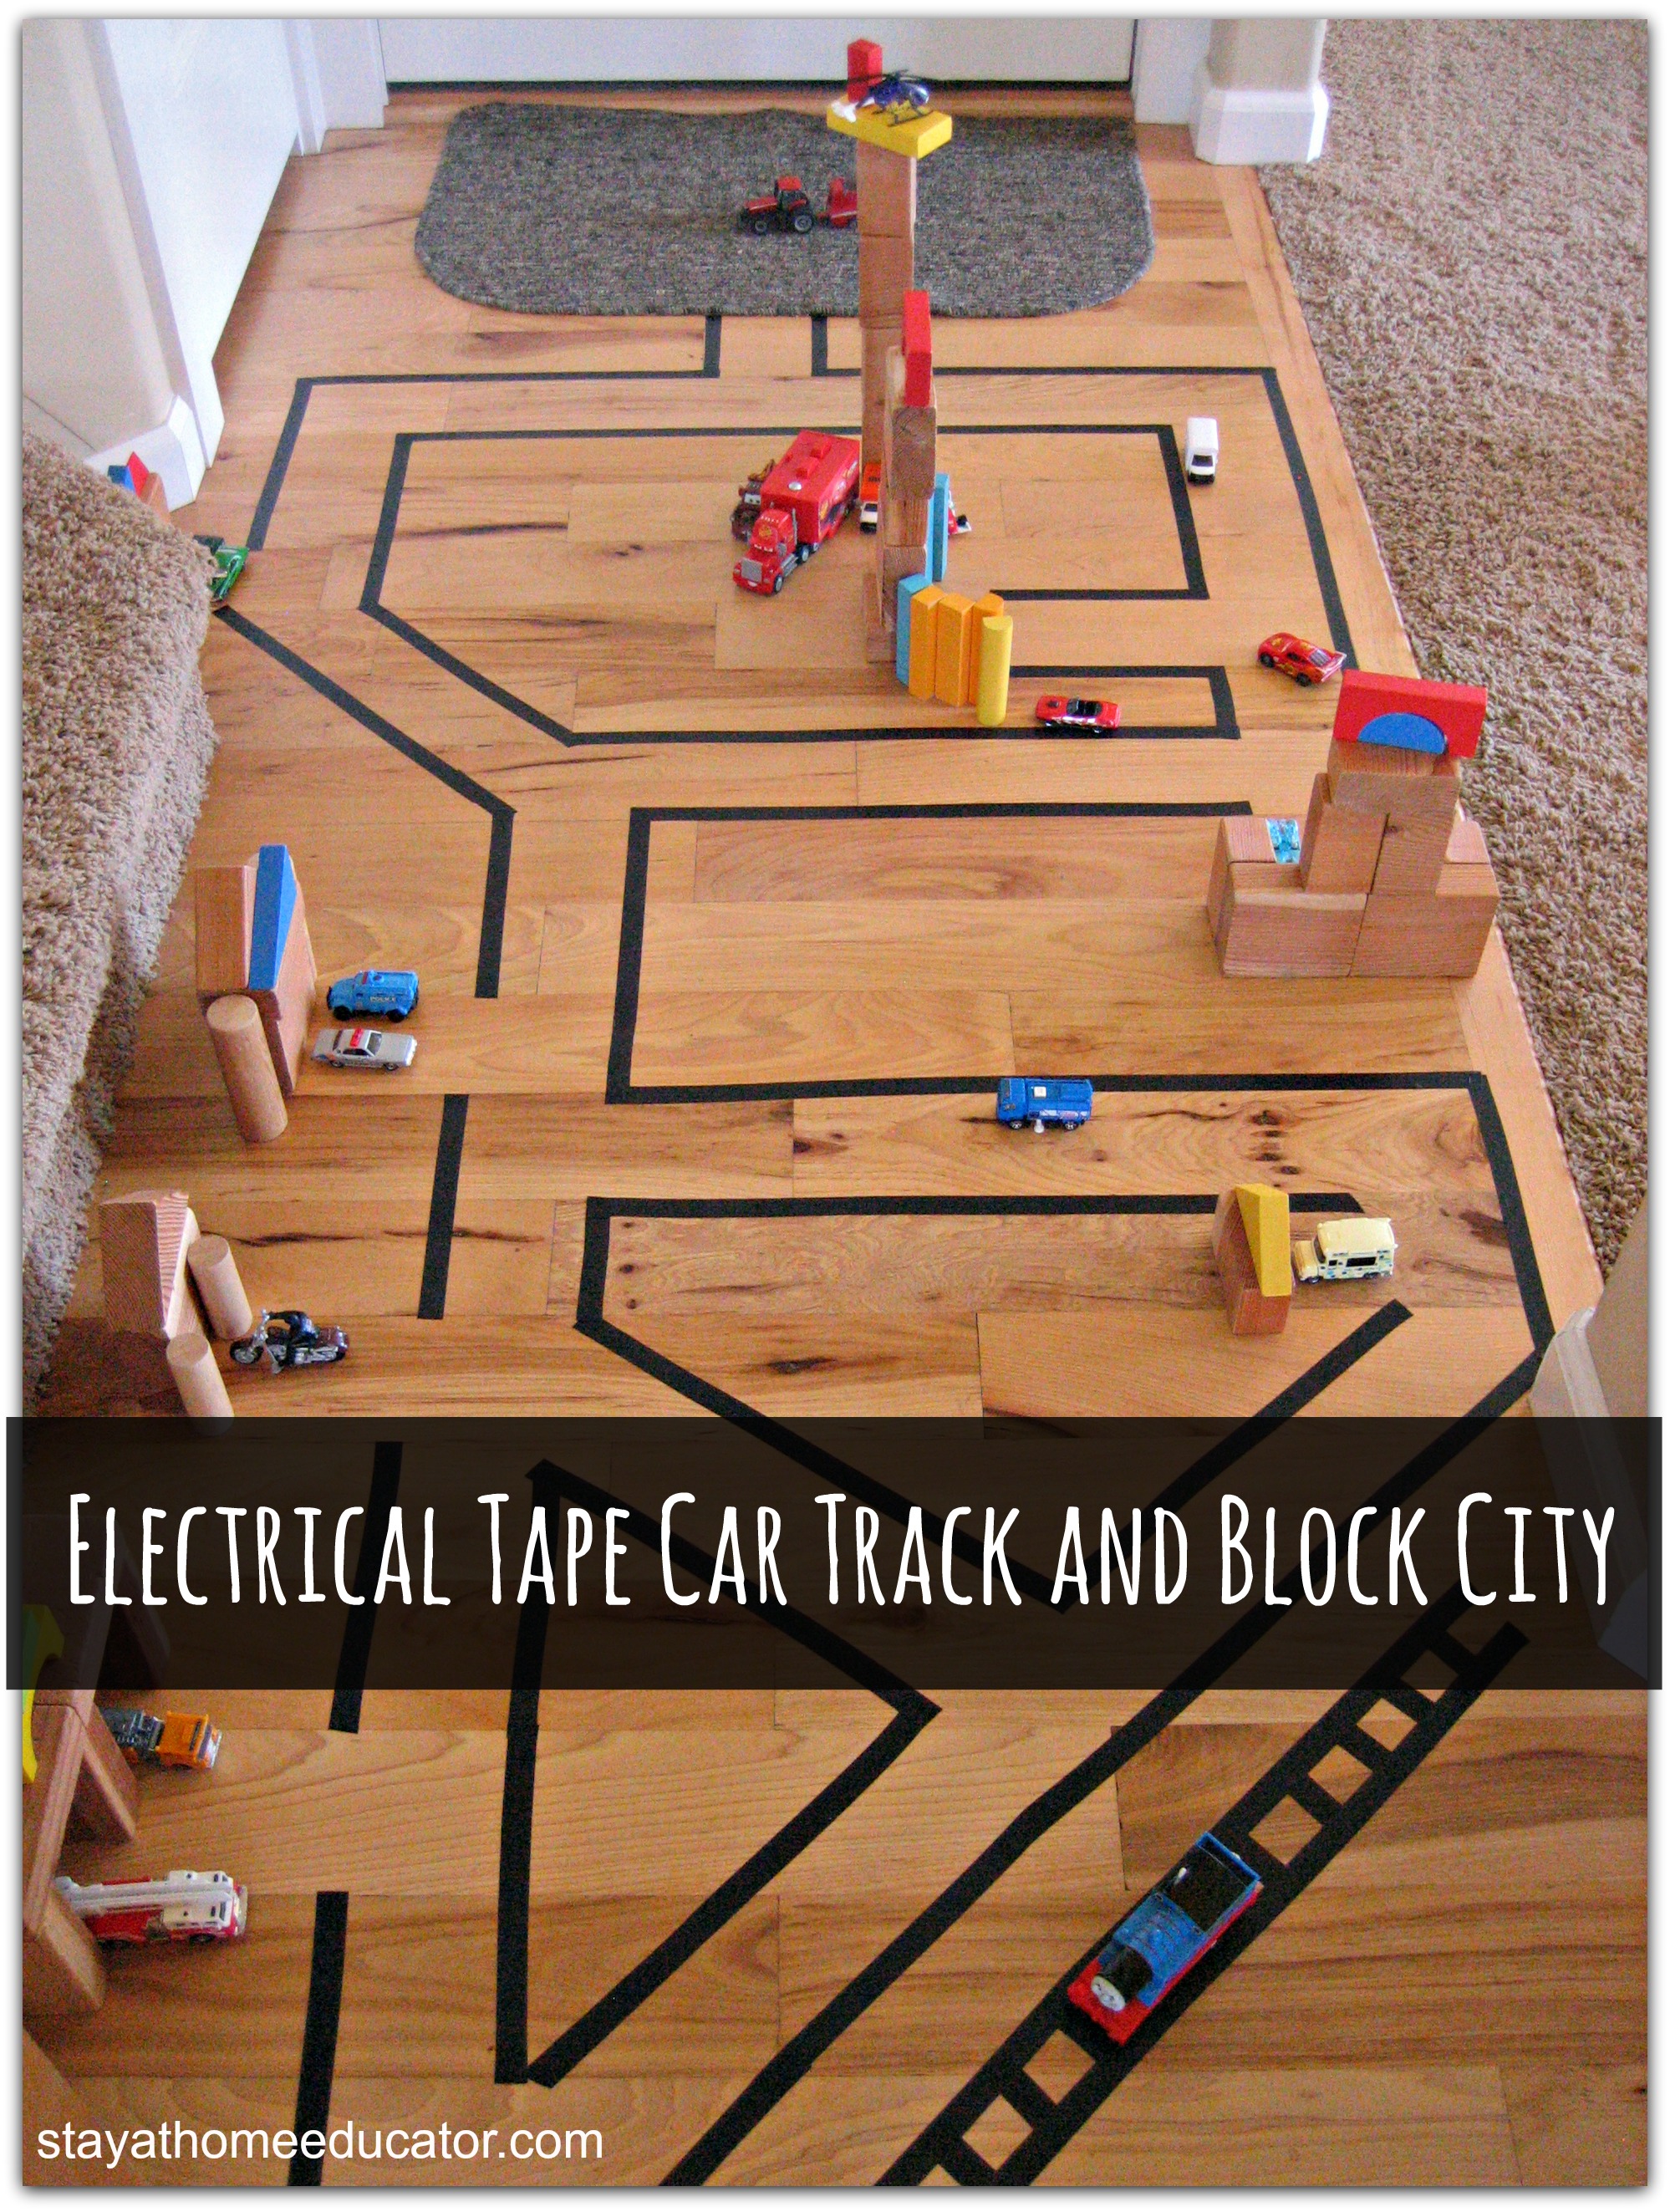 Electrical Tape Car Track and Block City